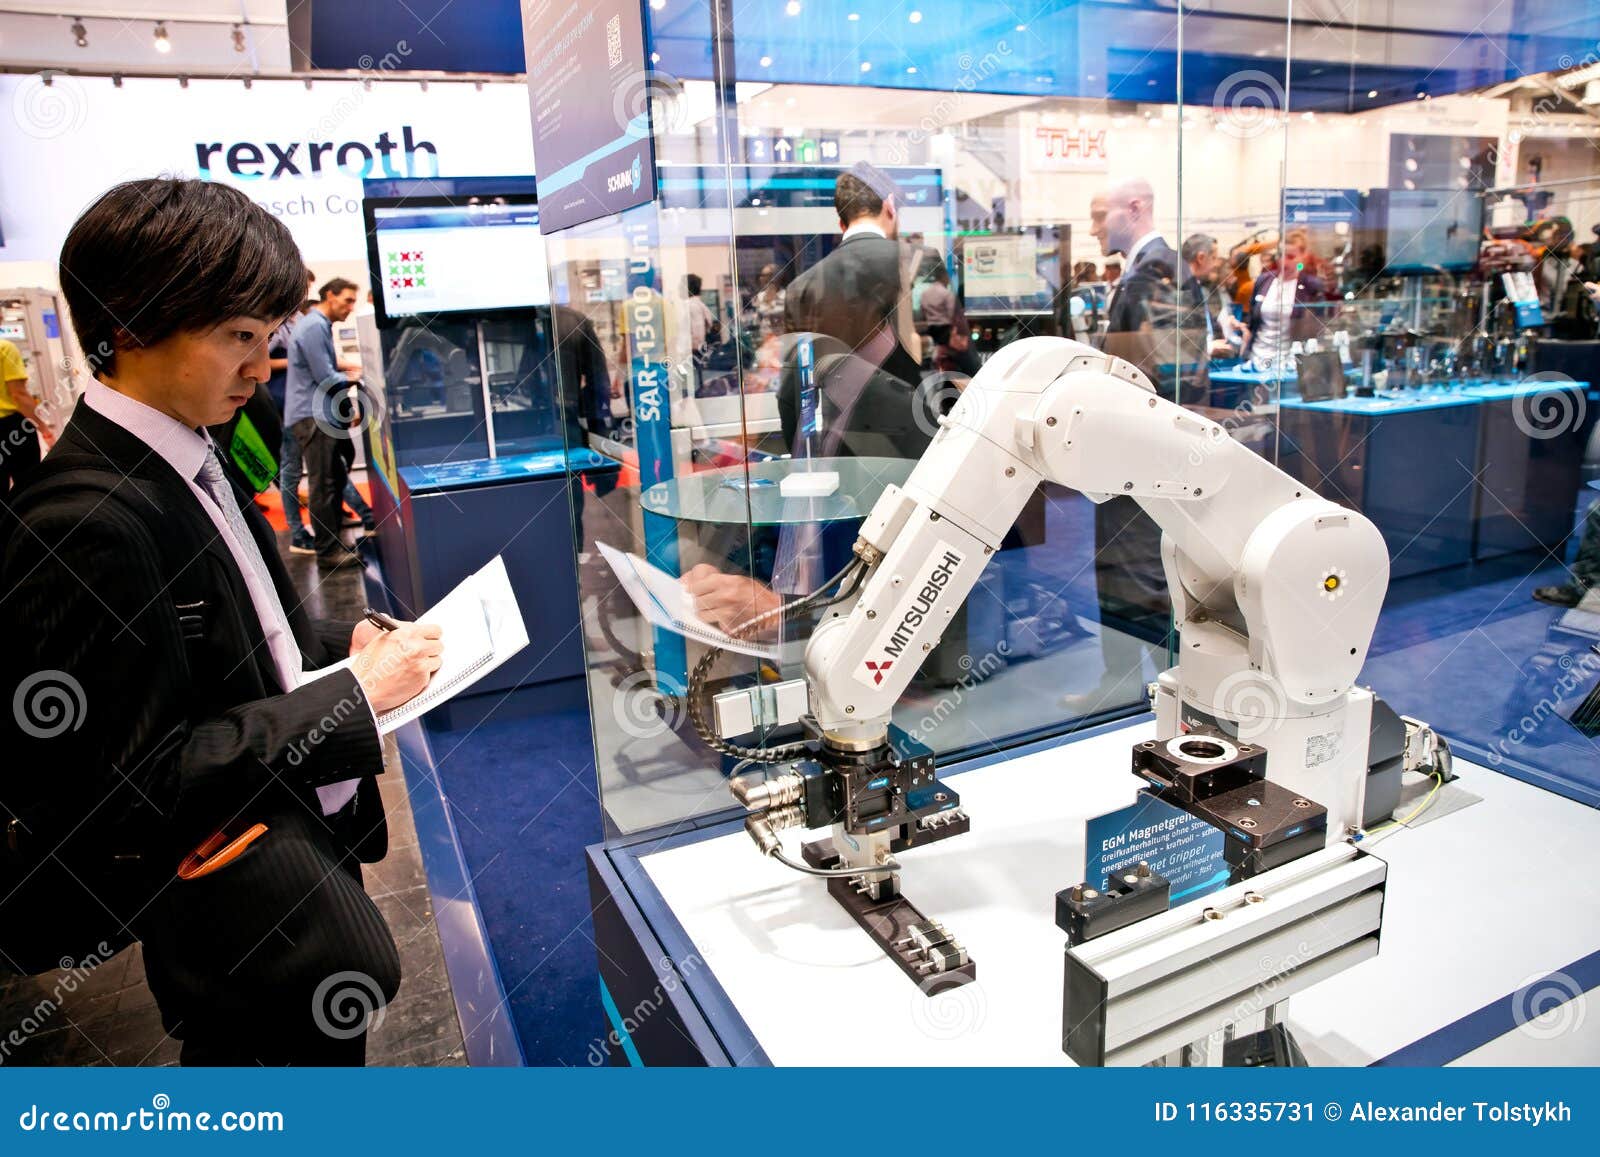 Mitsubishi Robot on Stand on Messe Fair Hannover, Germany Editorial Photo - of hand, construction: 116335731